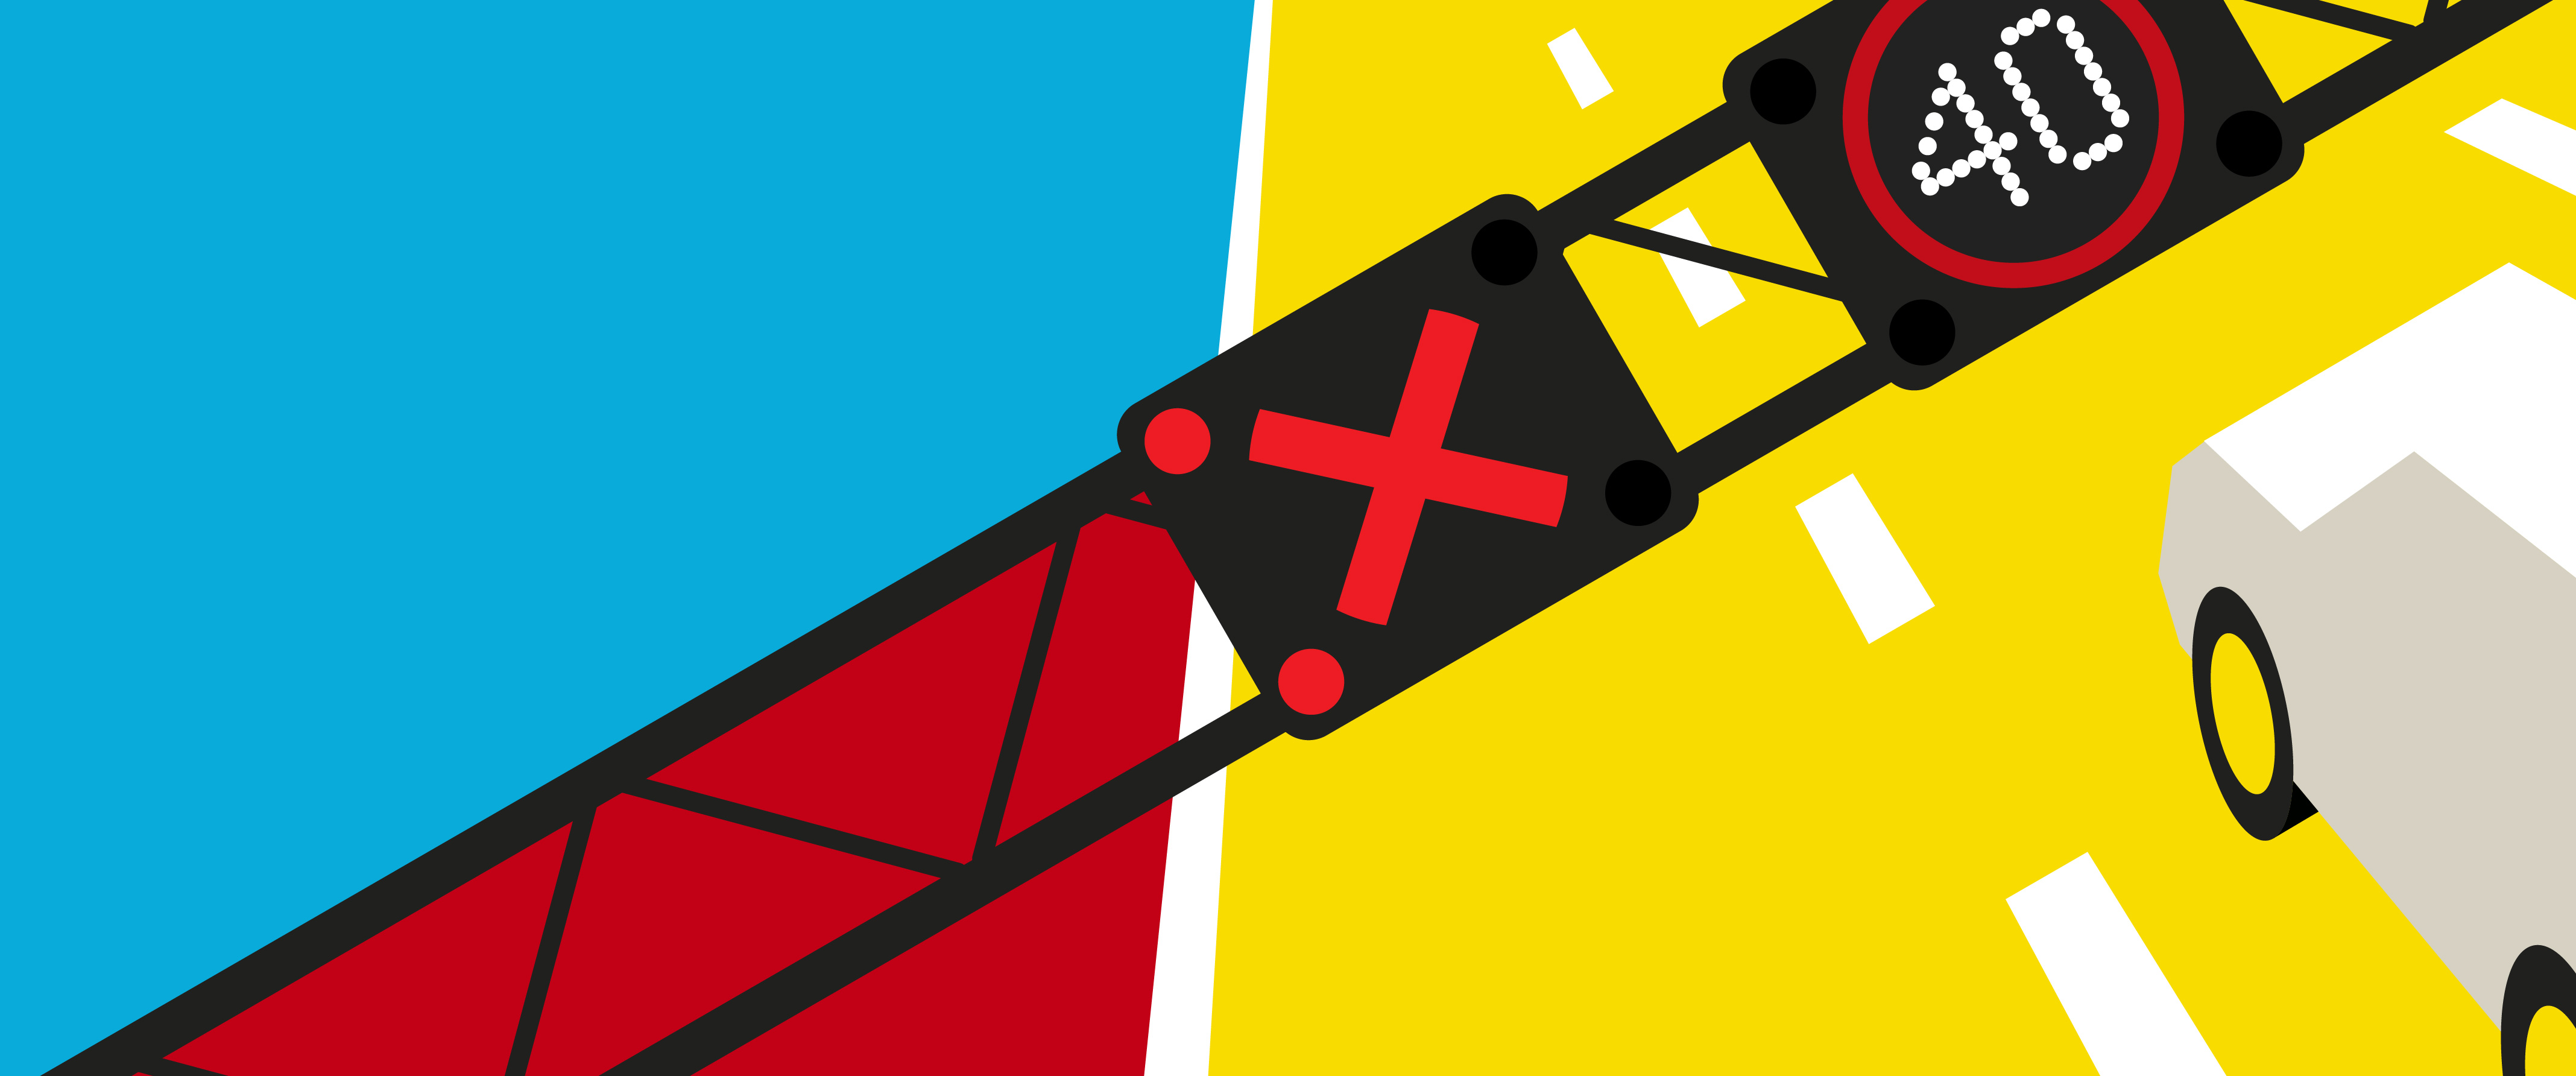 illustration of a red x sign on a gantry